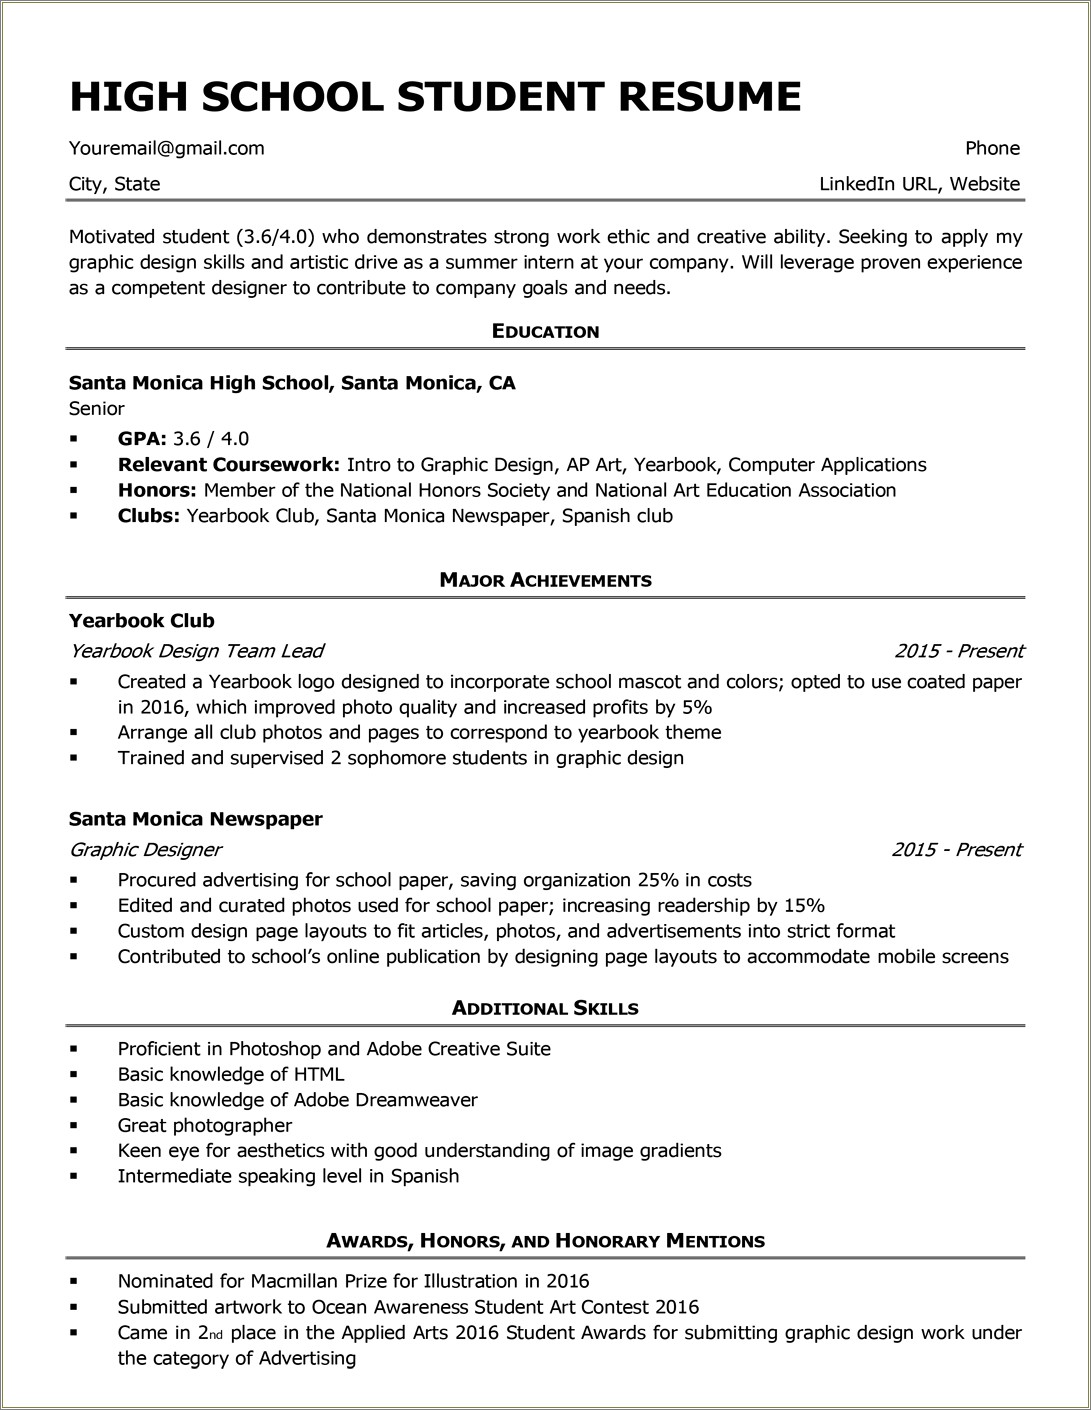 Working While Still In High School Resume